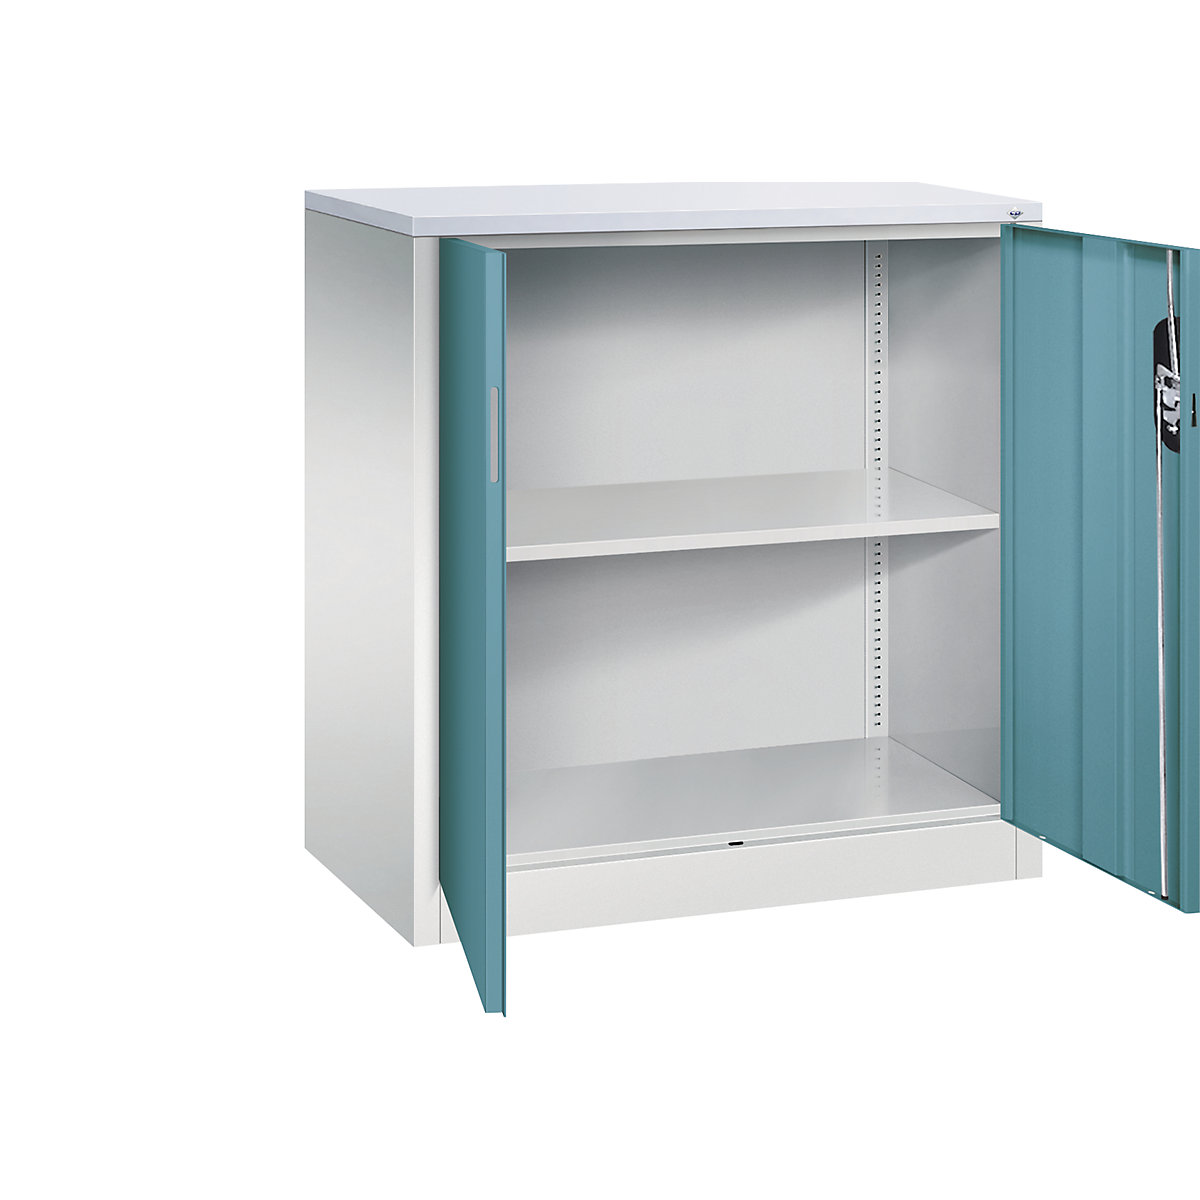 C+P – ACURADO filing sideboard, 2 file heights, HxWxD 1000 x 930 x 500 mm, light grey / water blue